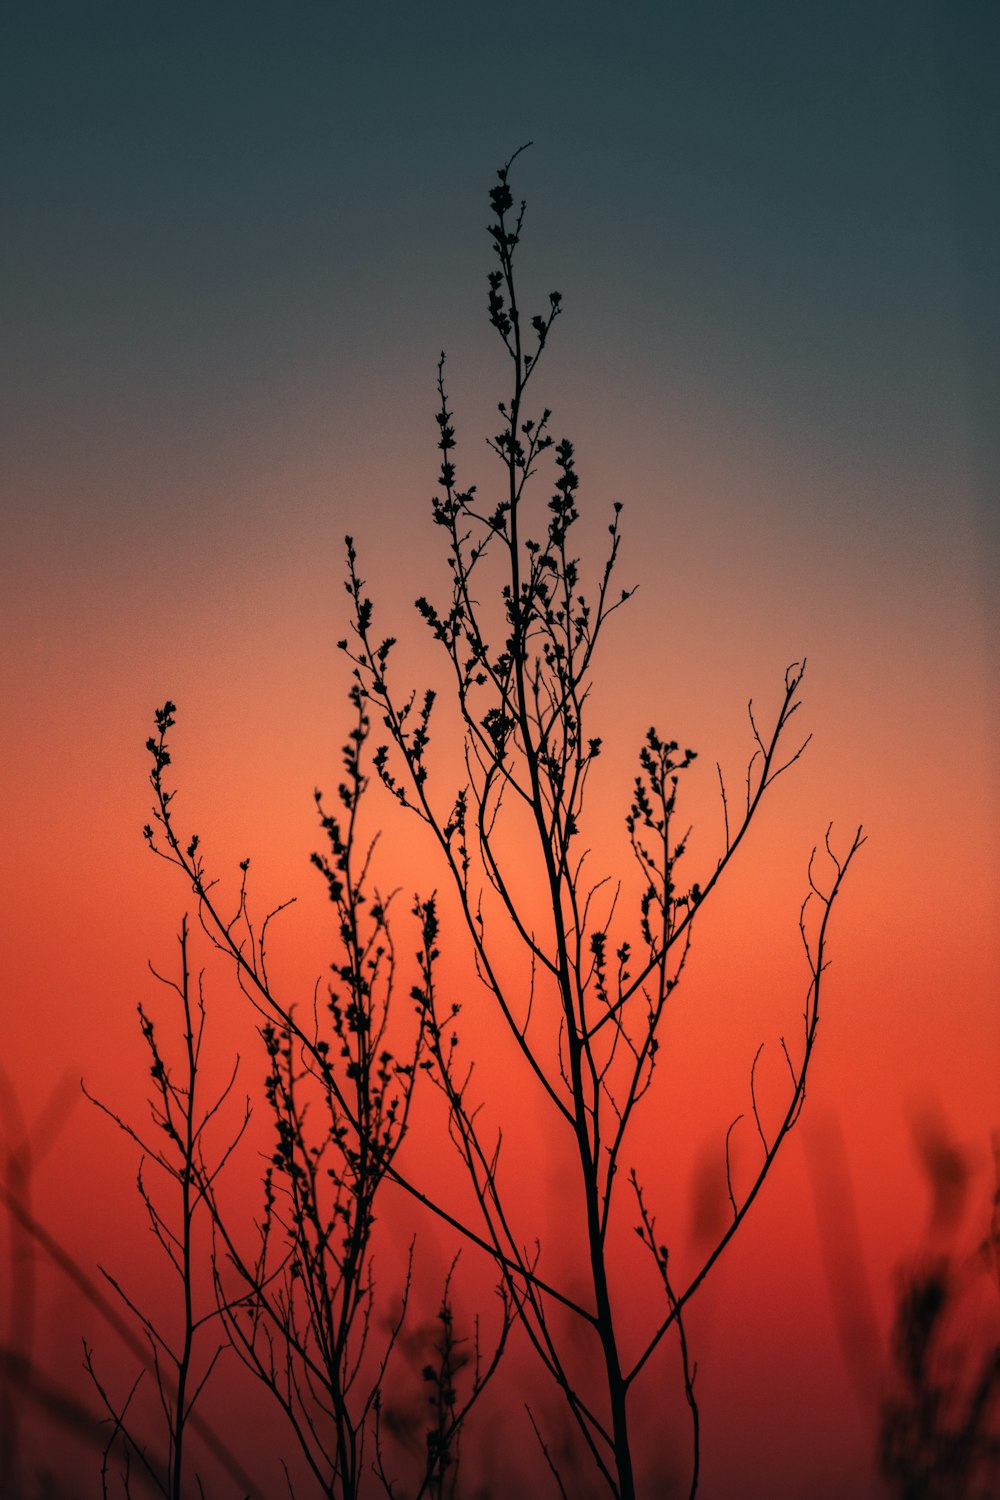 the silhouette of a tree against a sunset